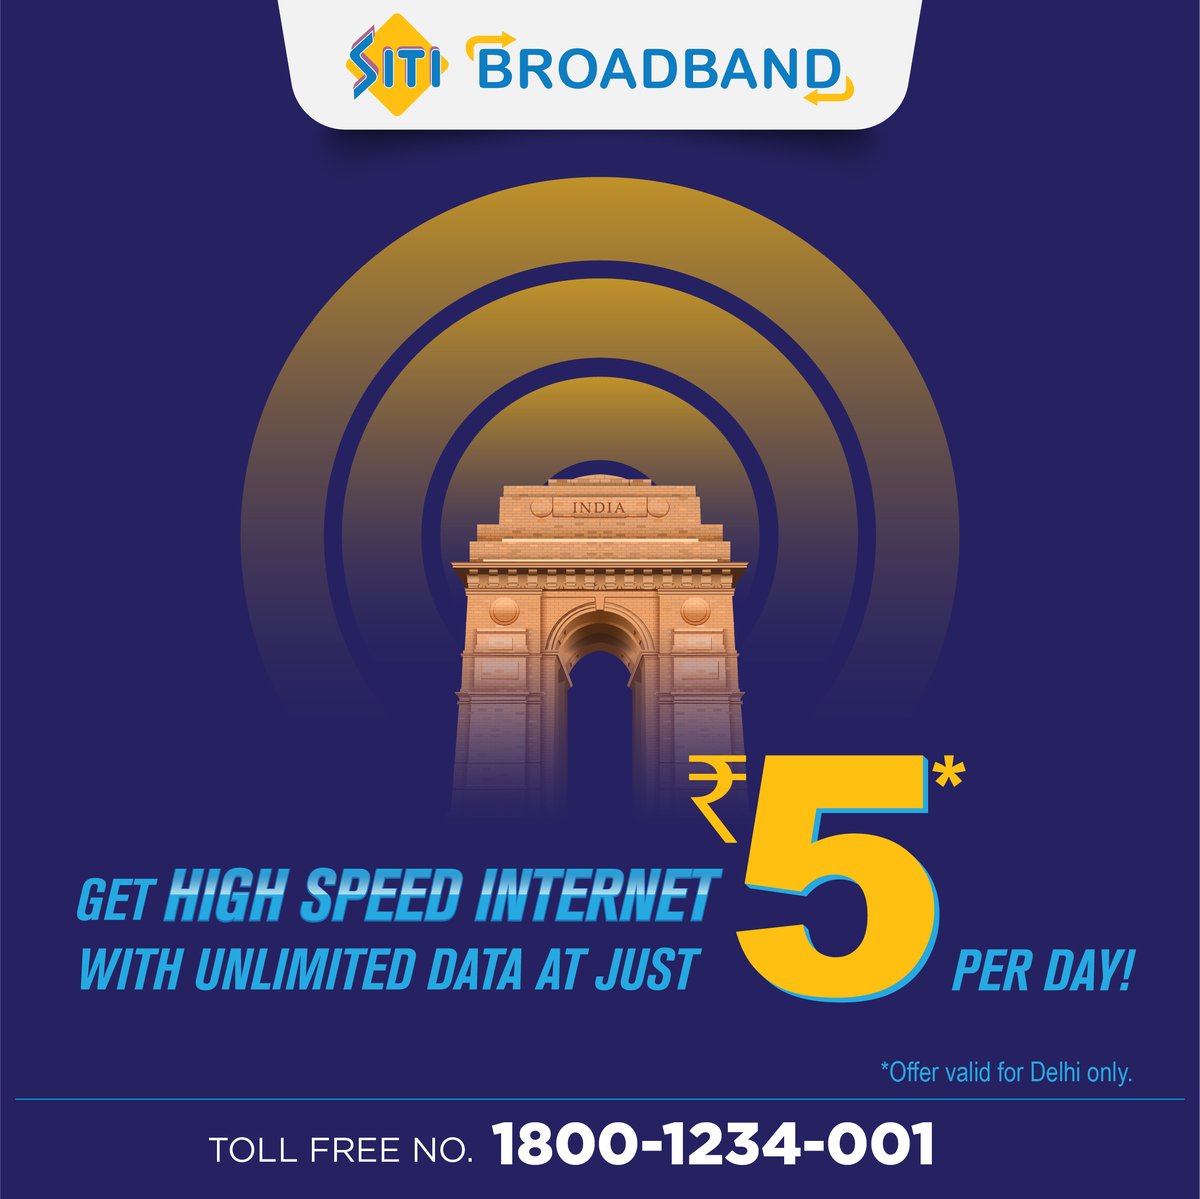 Want unlimited internet without breaking the bank? Get blazing fast speeds and unlimited data at just Rs 5 per day, only with SITI !
.
.
#SITIBroadband #Highspeedinternet #Broadbandplans #Wifi #Broadbandspeed #Delhi